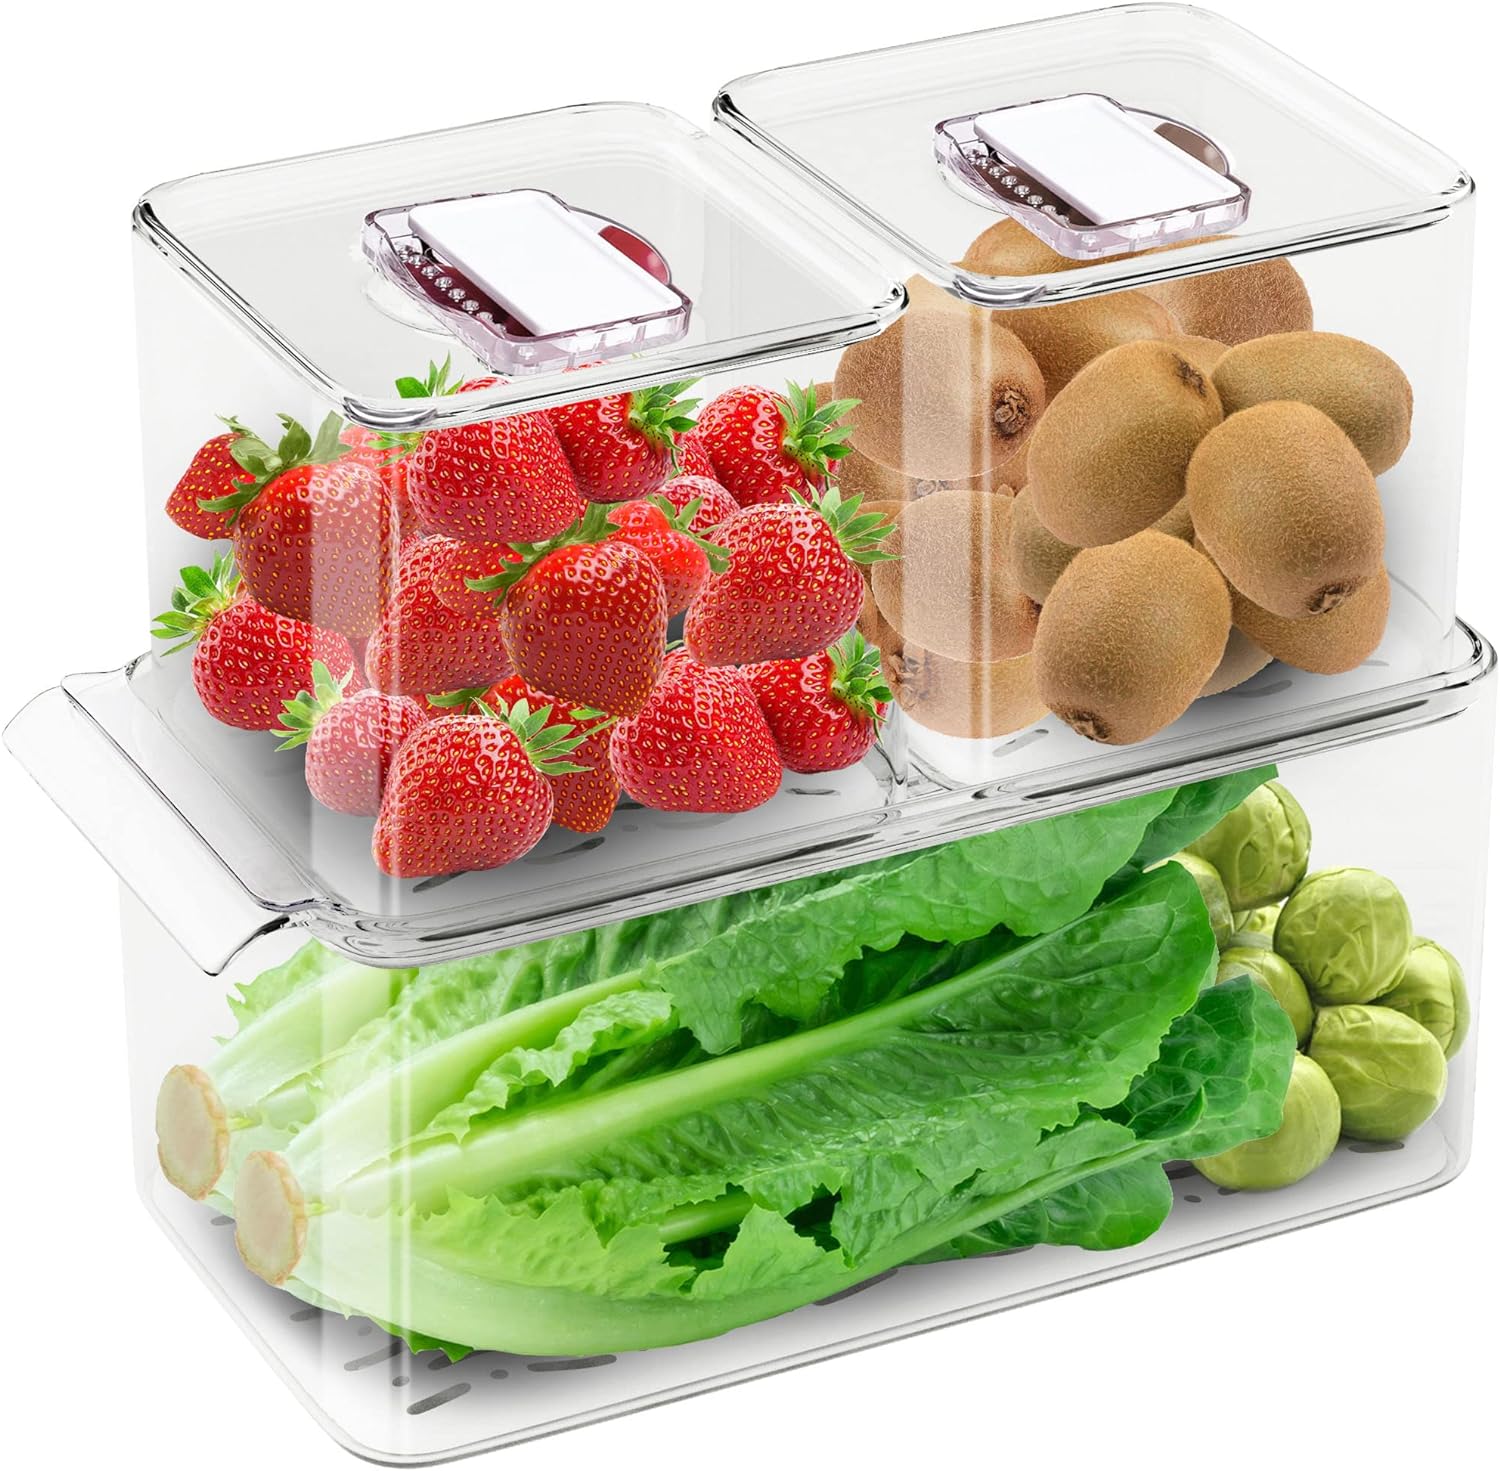 Produce Saver Containers for Refrigerator, Food Fruit Vegetables storage, 3 Pcs Stackable Freezer Fridge Organizer, Fresh Keeper Drawer Bin Basket with Vented Lids & Removable Drain Tray